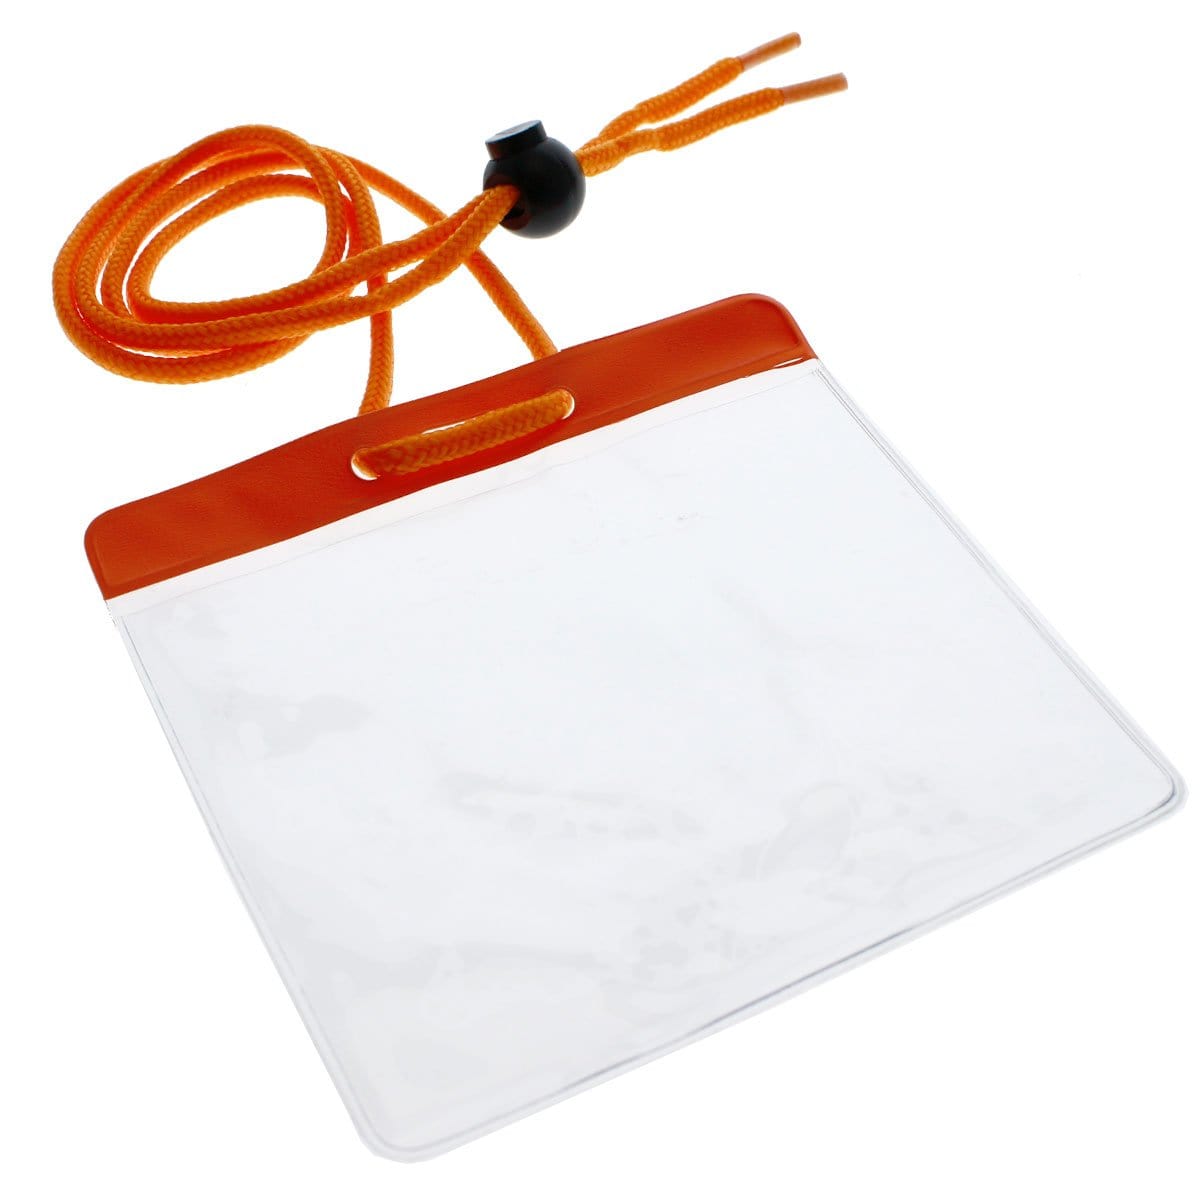 1860-2905 Clear 4x3 Event Lanyard with Orange Bar and Lanyard